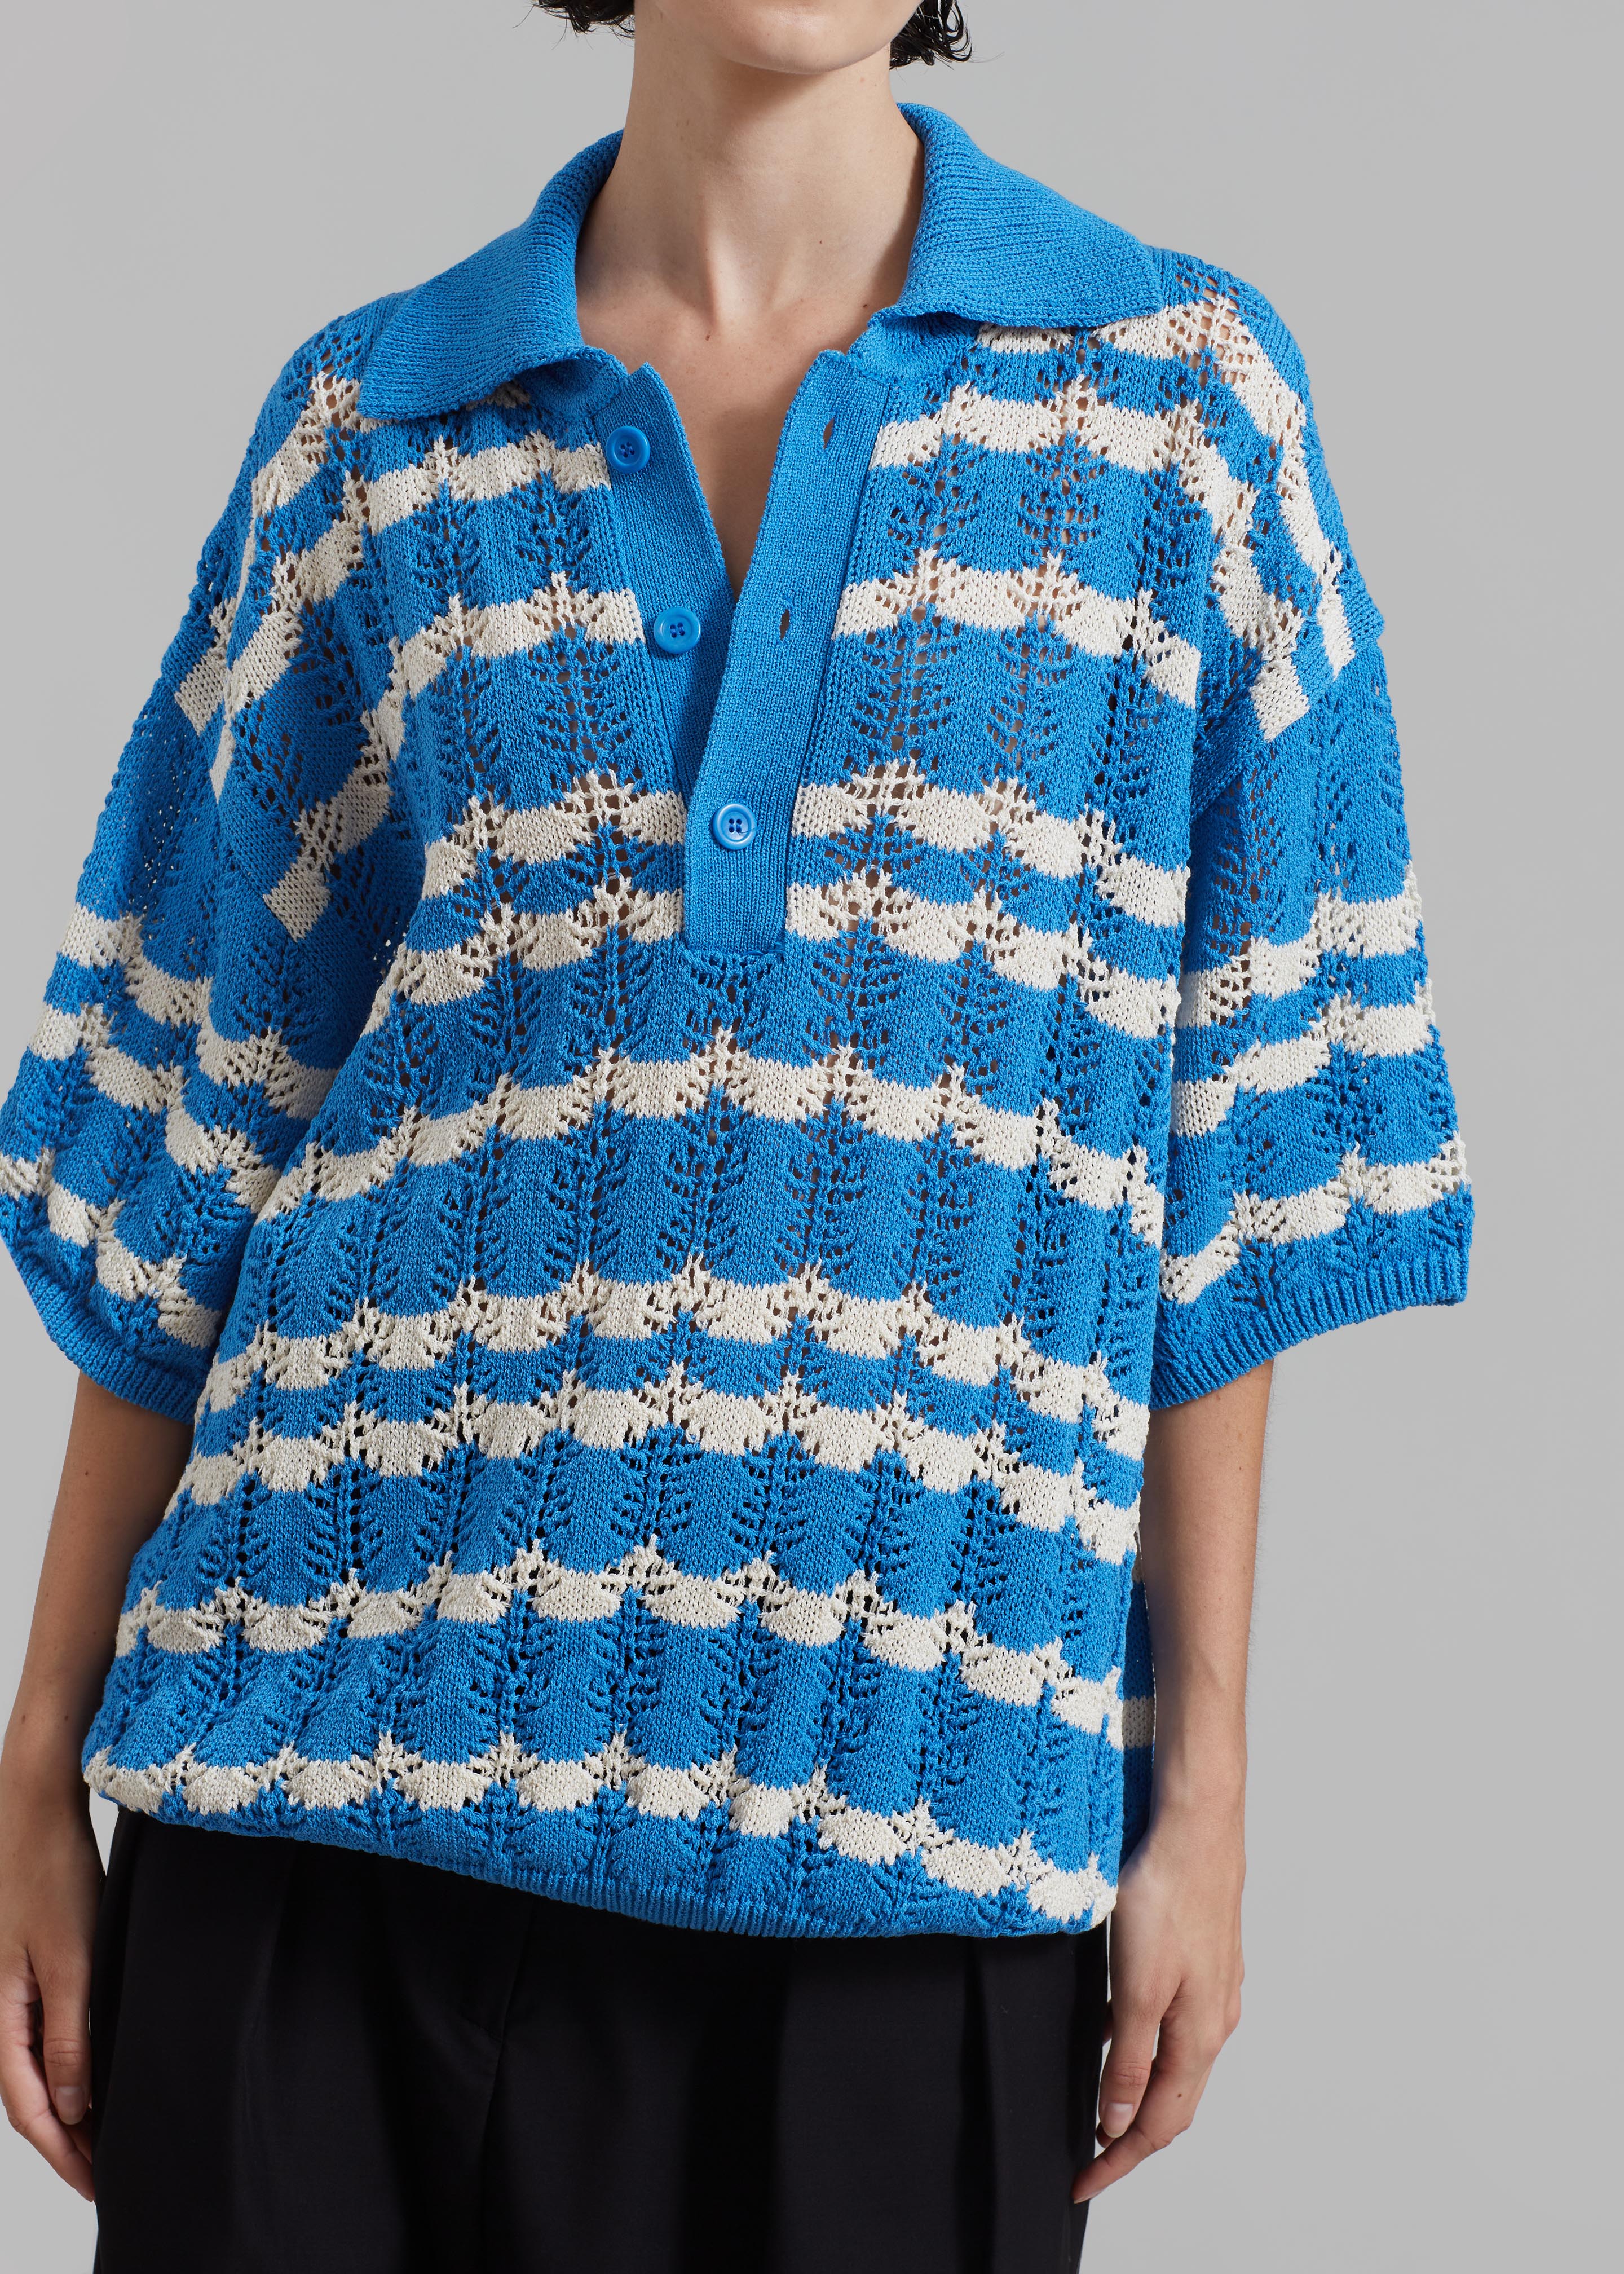 Lucca Knitted Top - Blue - 6